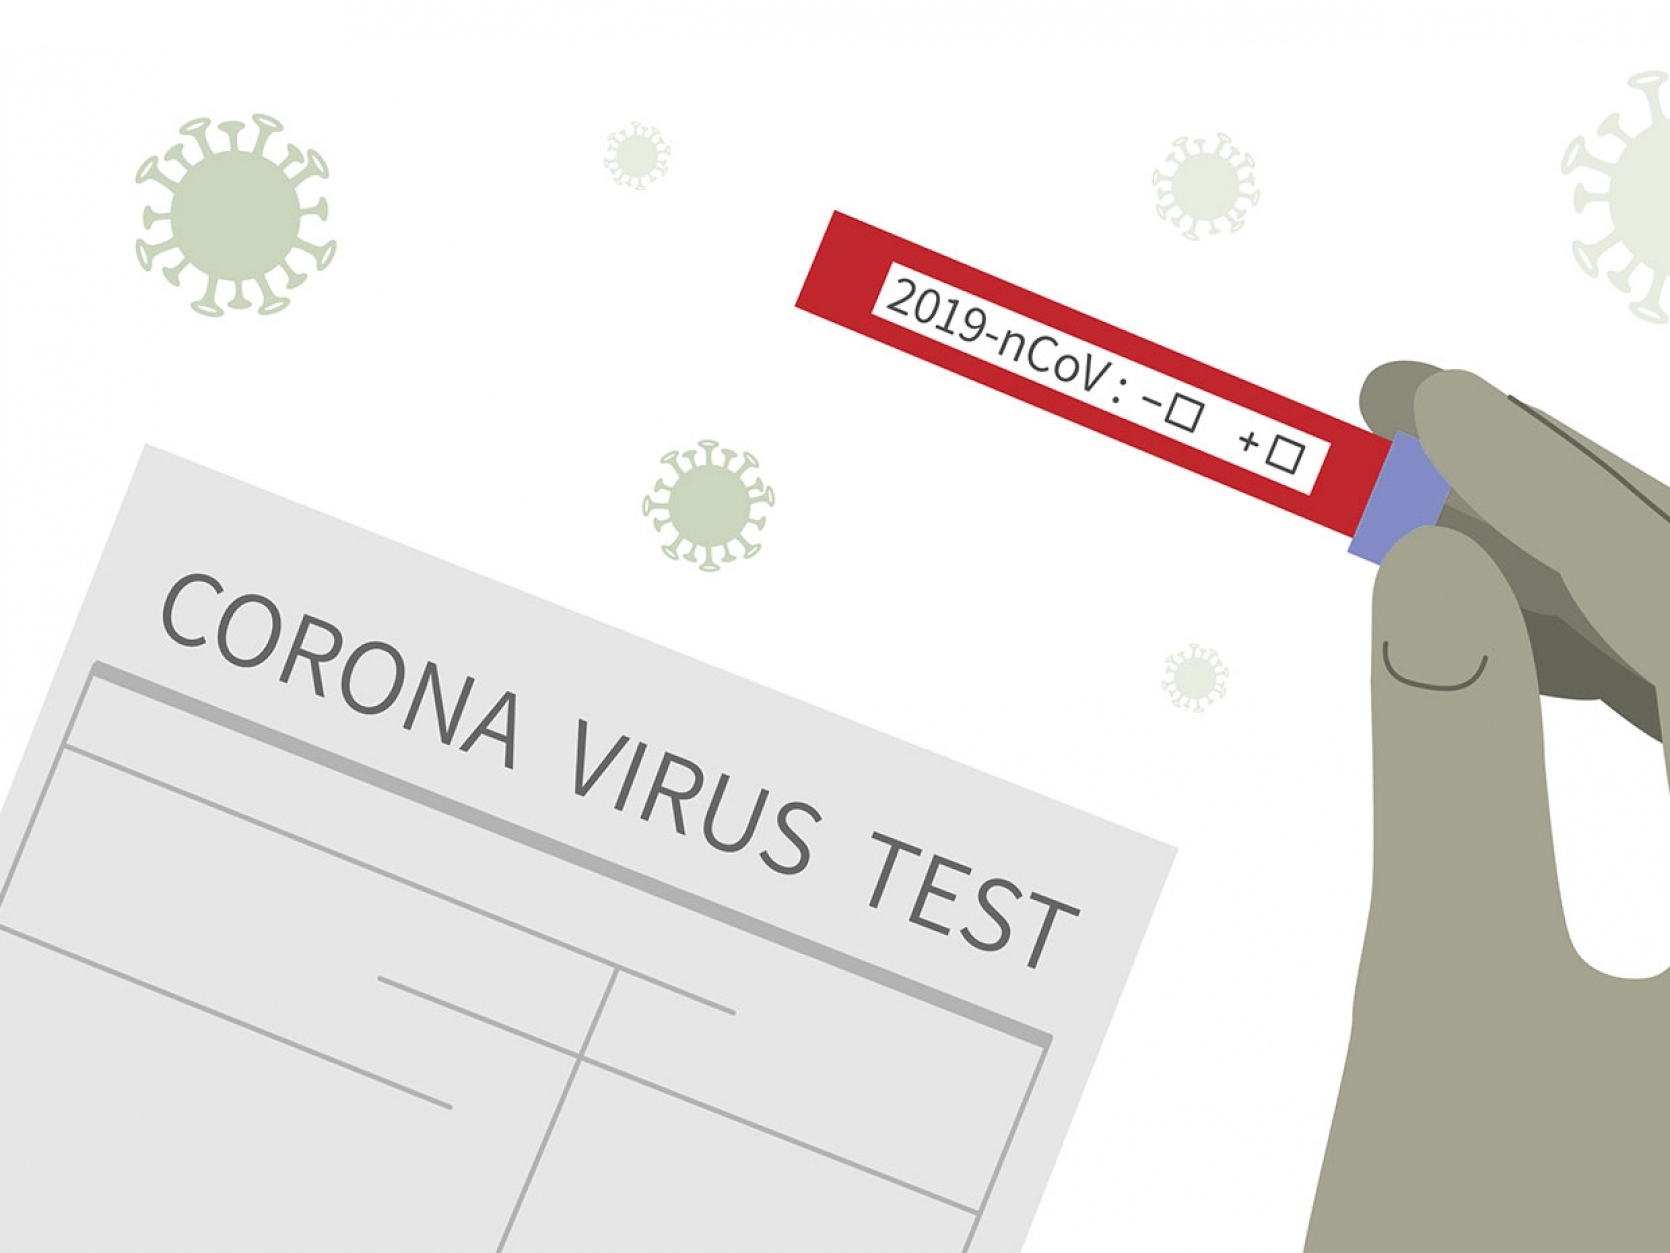 BECTON DICKINSON SEEKS EMERGENCY FDA APPROVAL FOR A TWO-HOUR CORONAVIRUS TEST